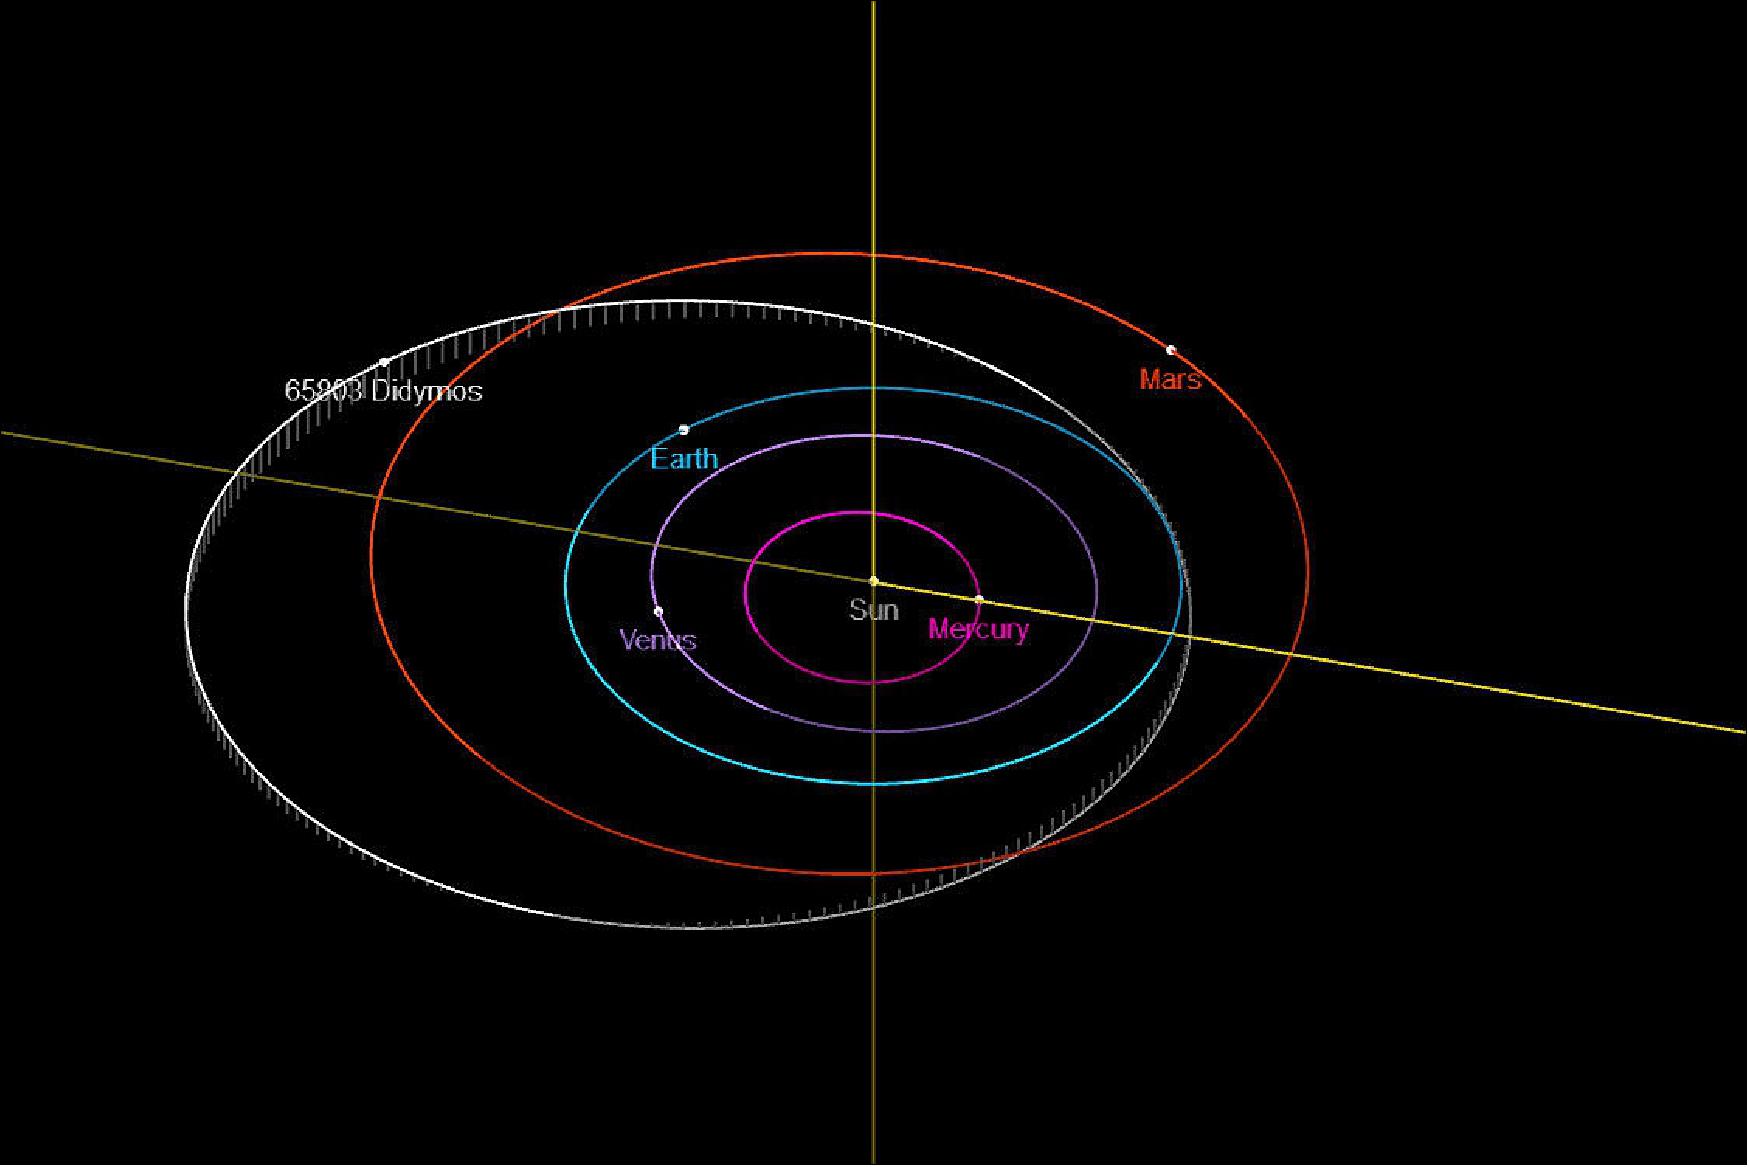 Figure 33: Didymos’ 770-day orbit, which circles from less than 10 million km from Earth to out beyond Mars, at more than double Earth’s distance from the Sun, as seen in the NASA JPL Small-Body Database Browser (image credit: NASA/JPL)